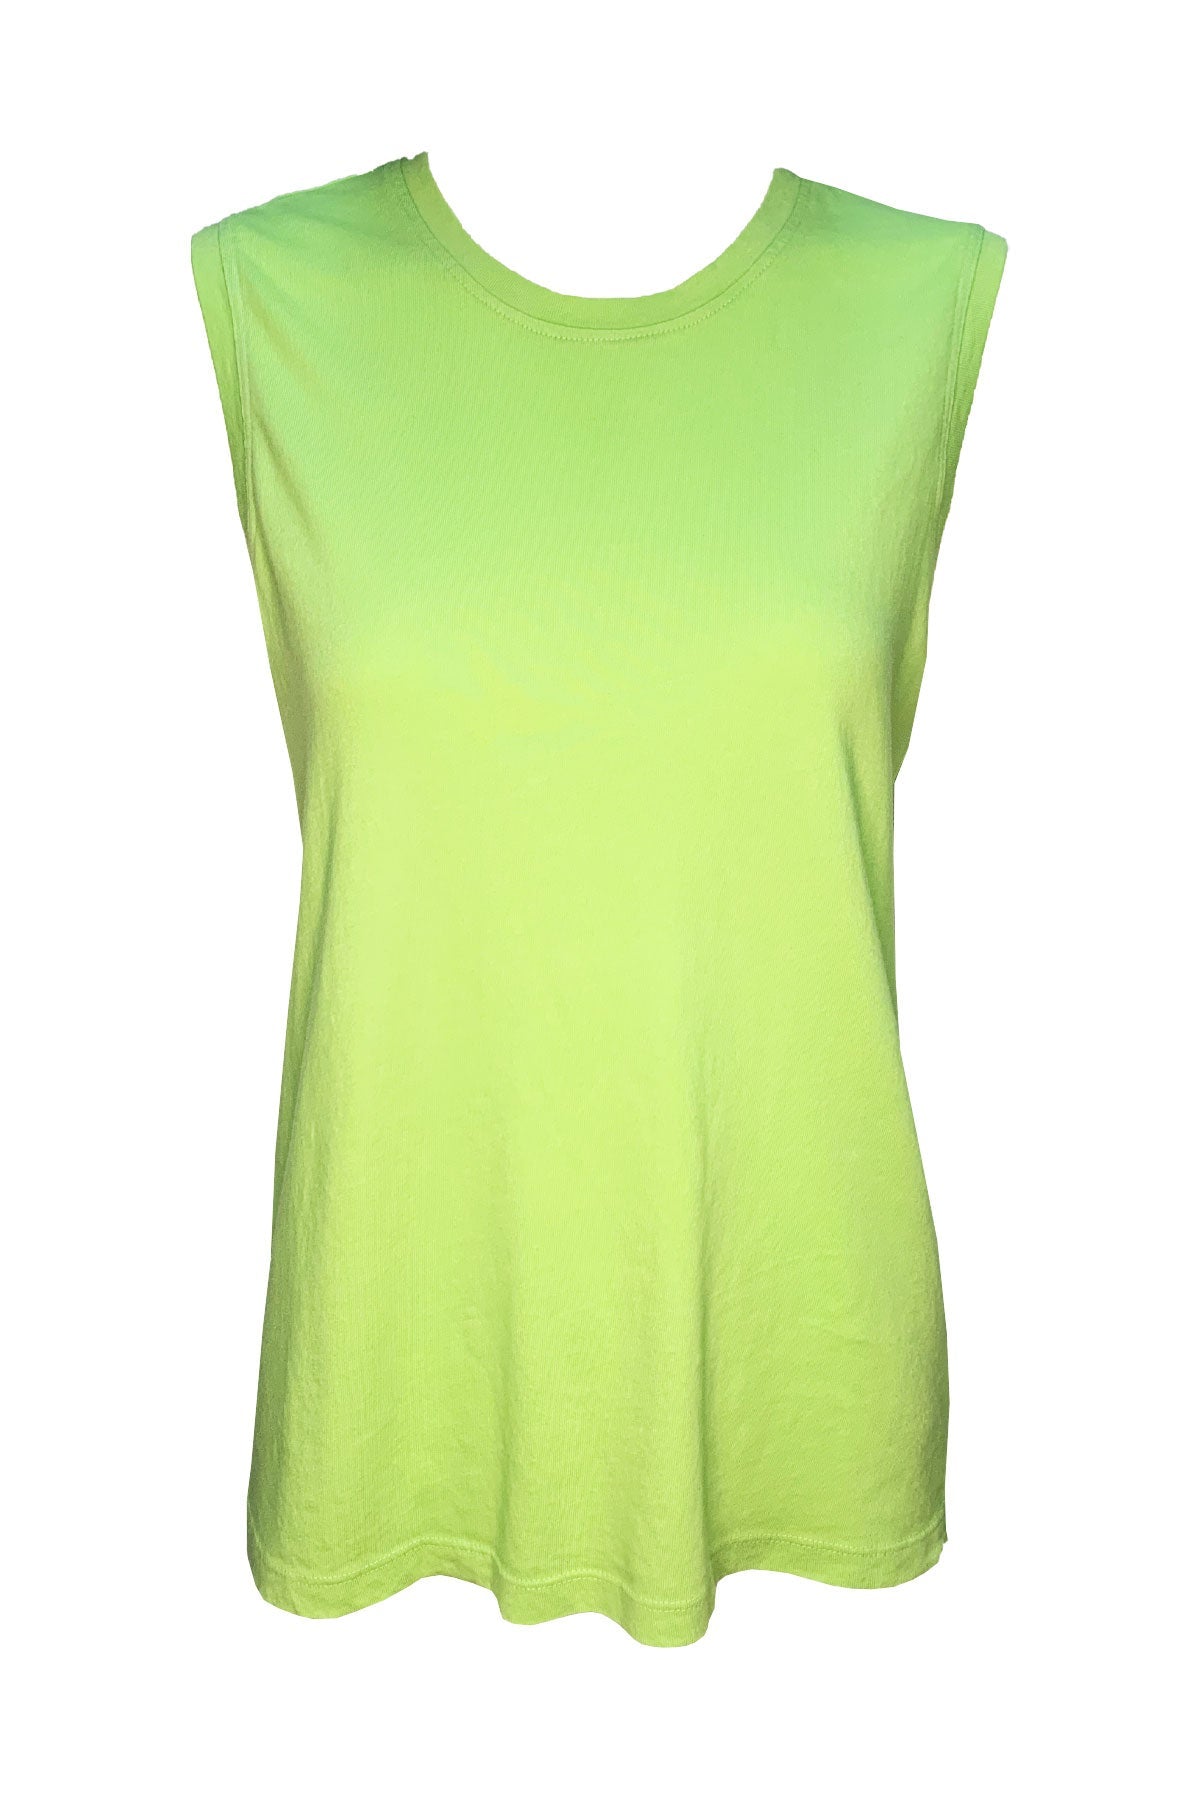 Lime Green Fitted Muscle Top - shop-olivia.com